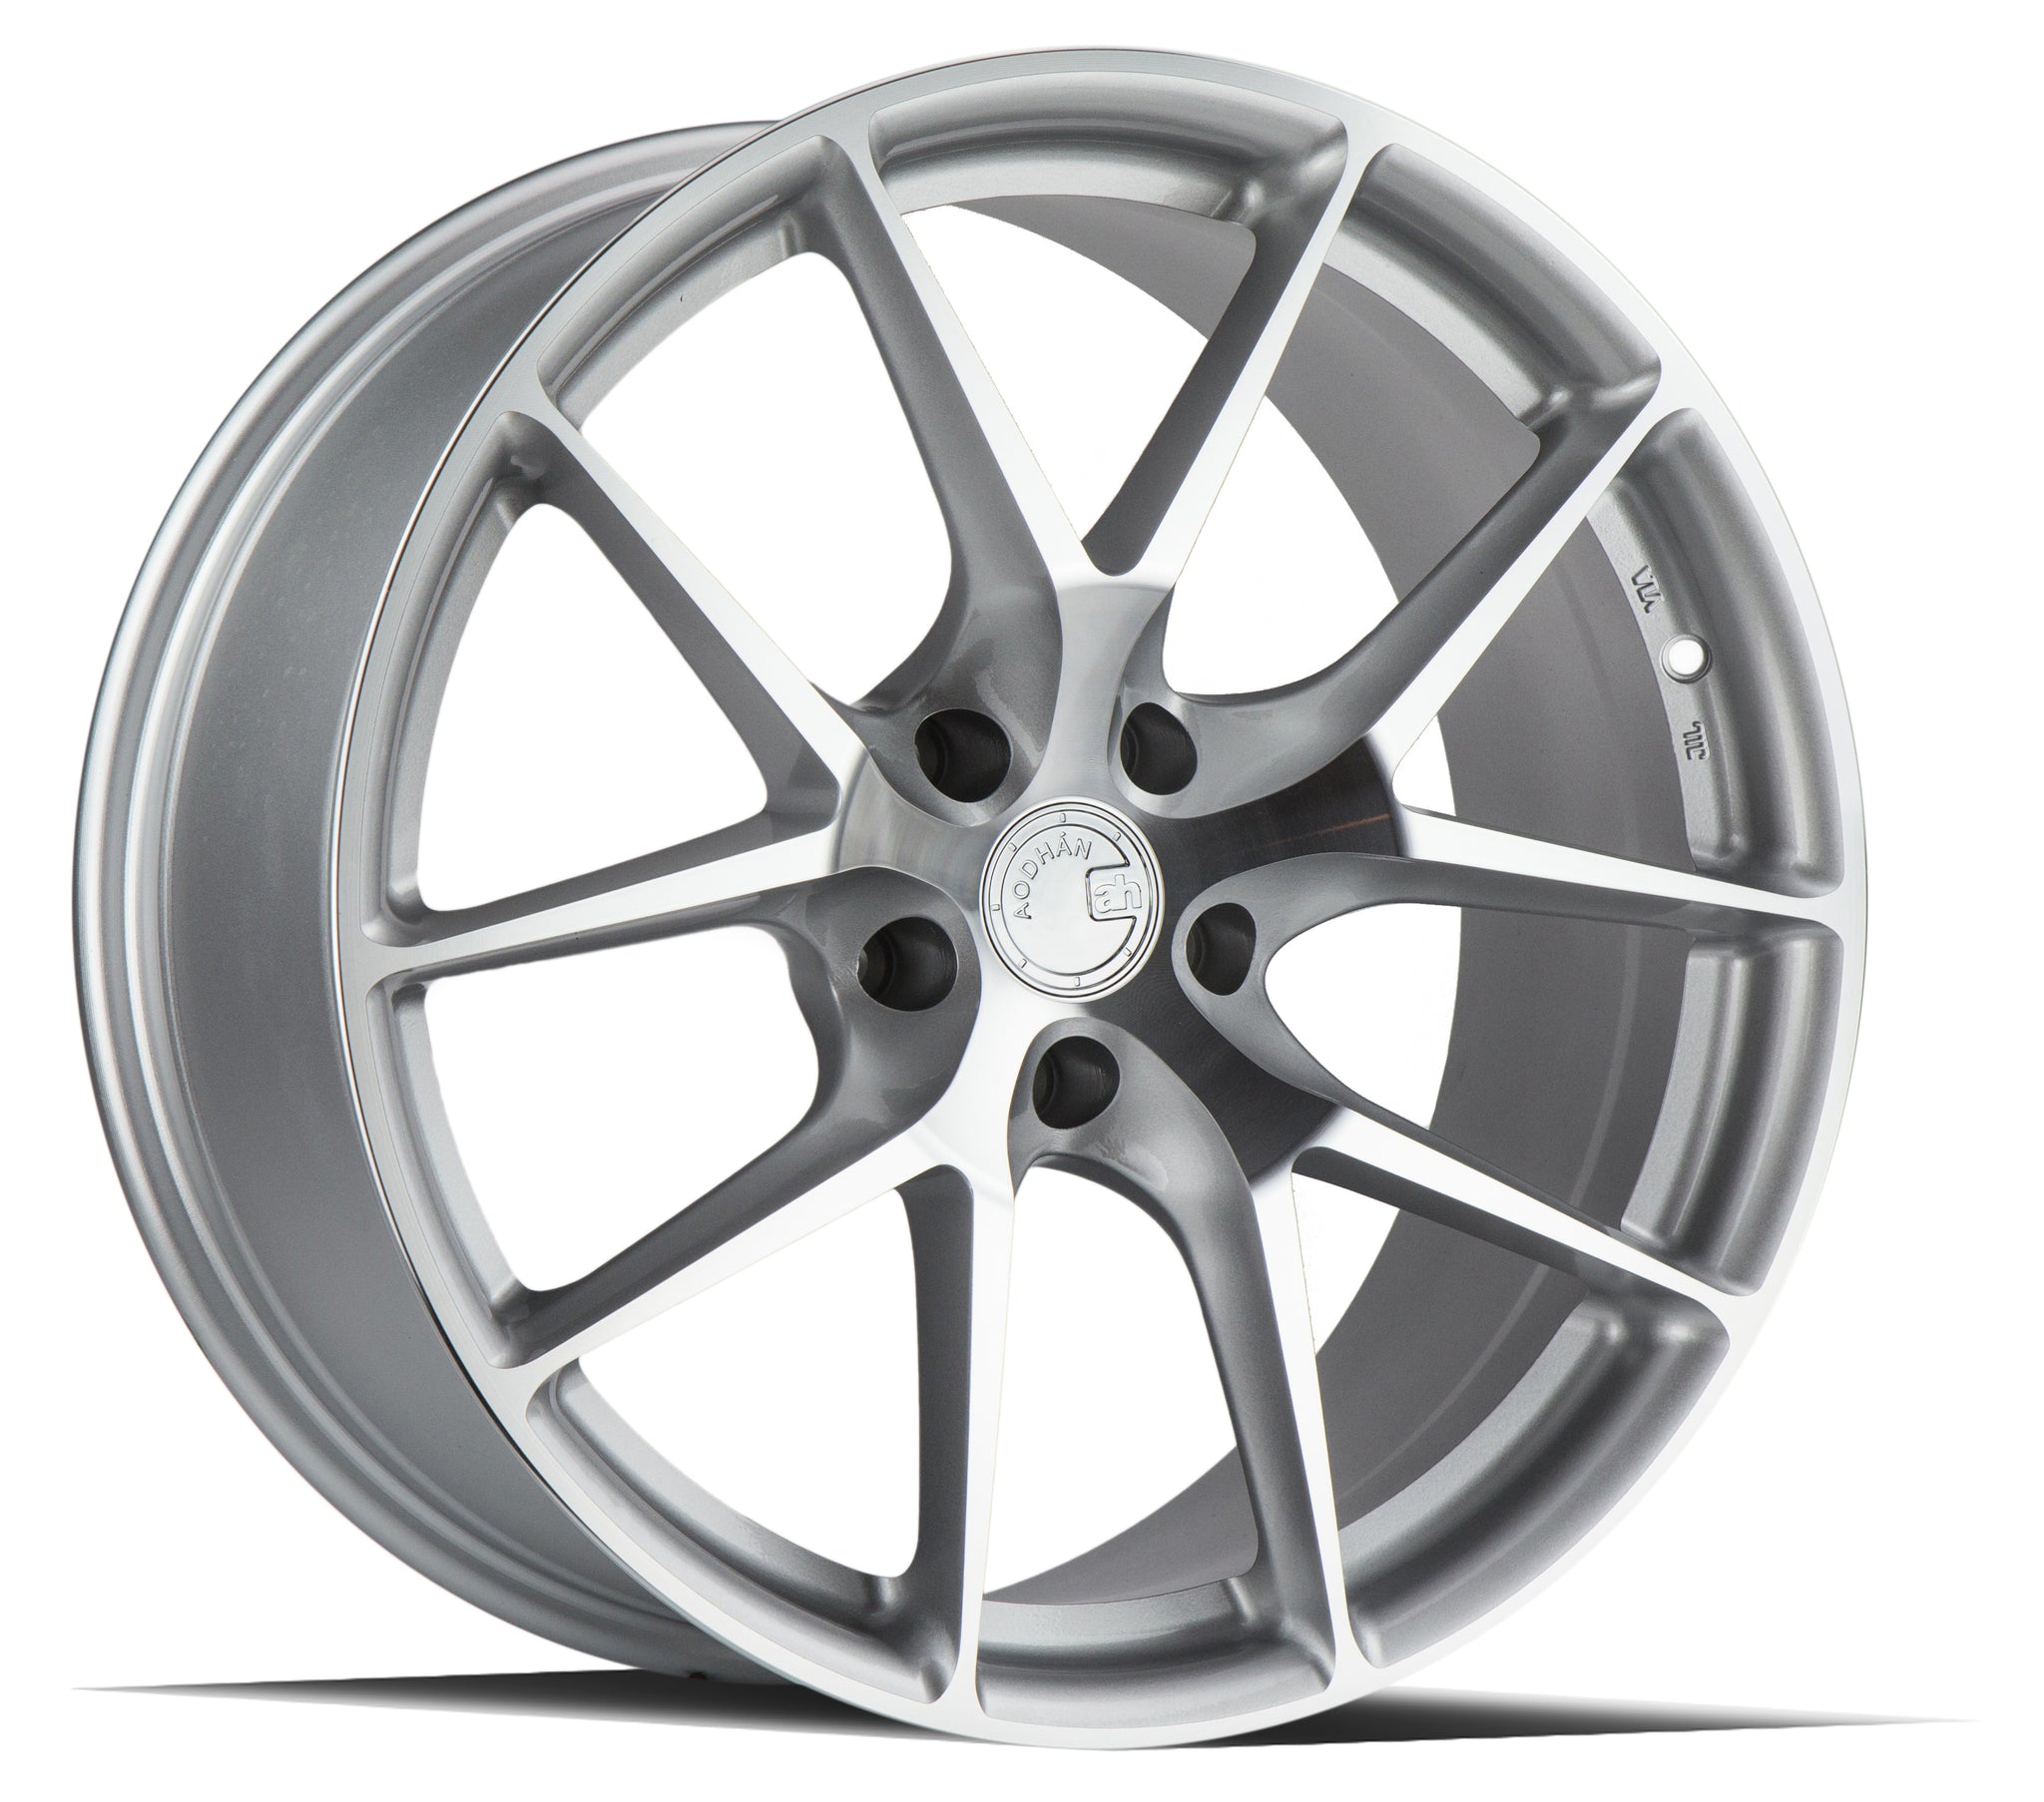 AODHAN AFF7 SILVER WITH MACHINED FACE WHEELS | 19X8.5 | 5X120 | OFFSET: 35MM | CB: 72.6MM